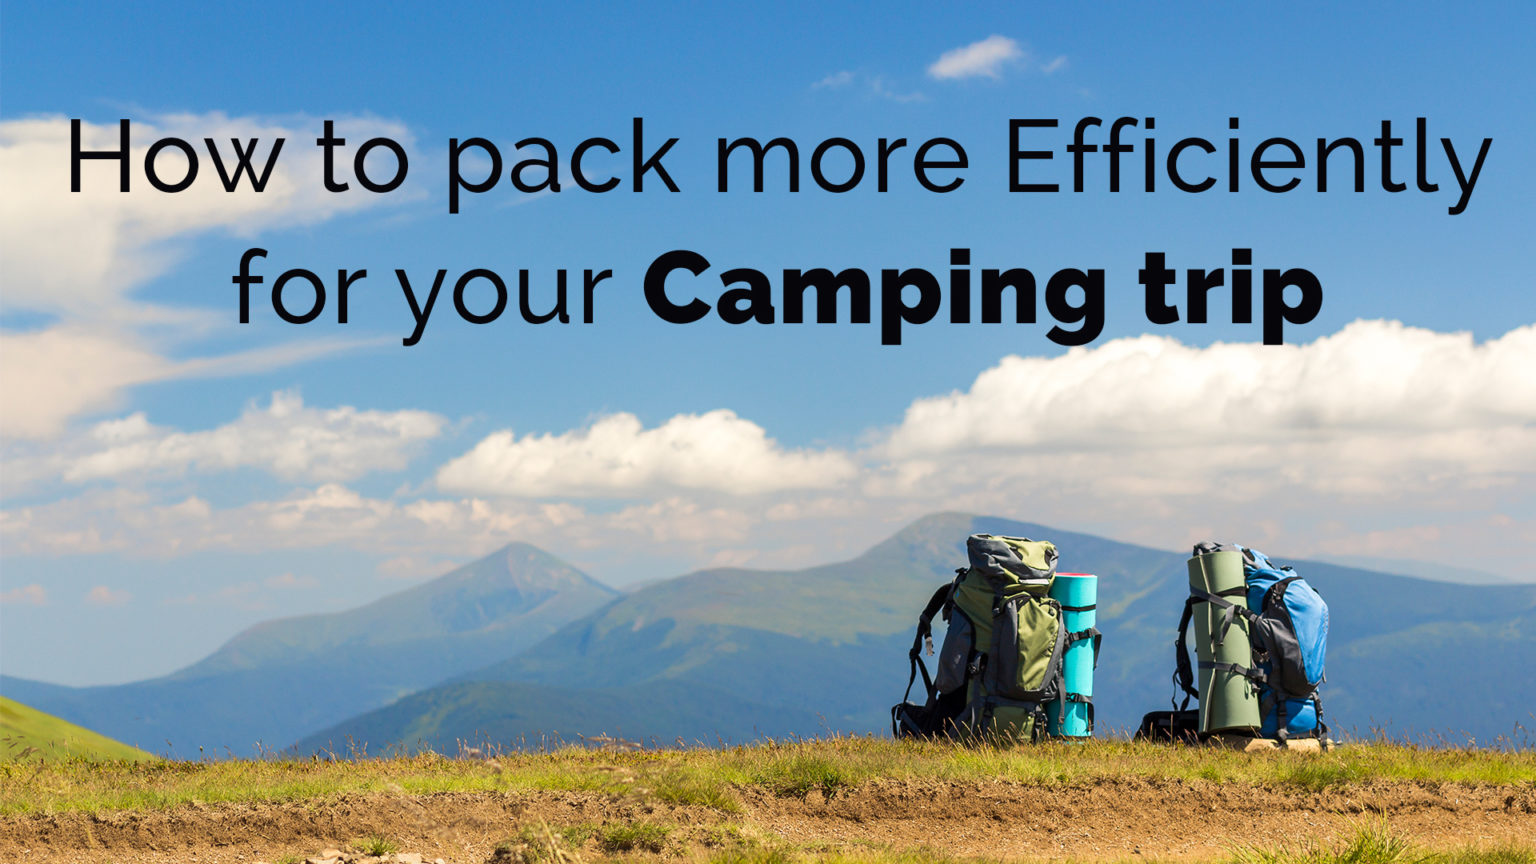 How To Pack More Efficiently For Your Camping Trip